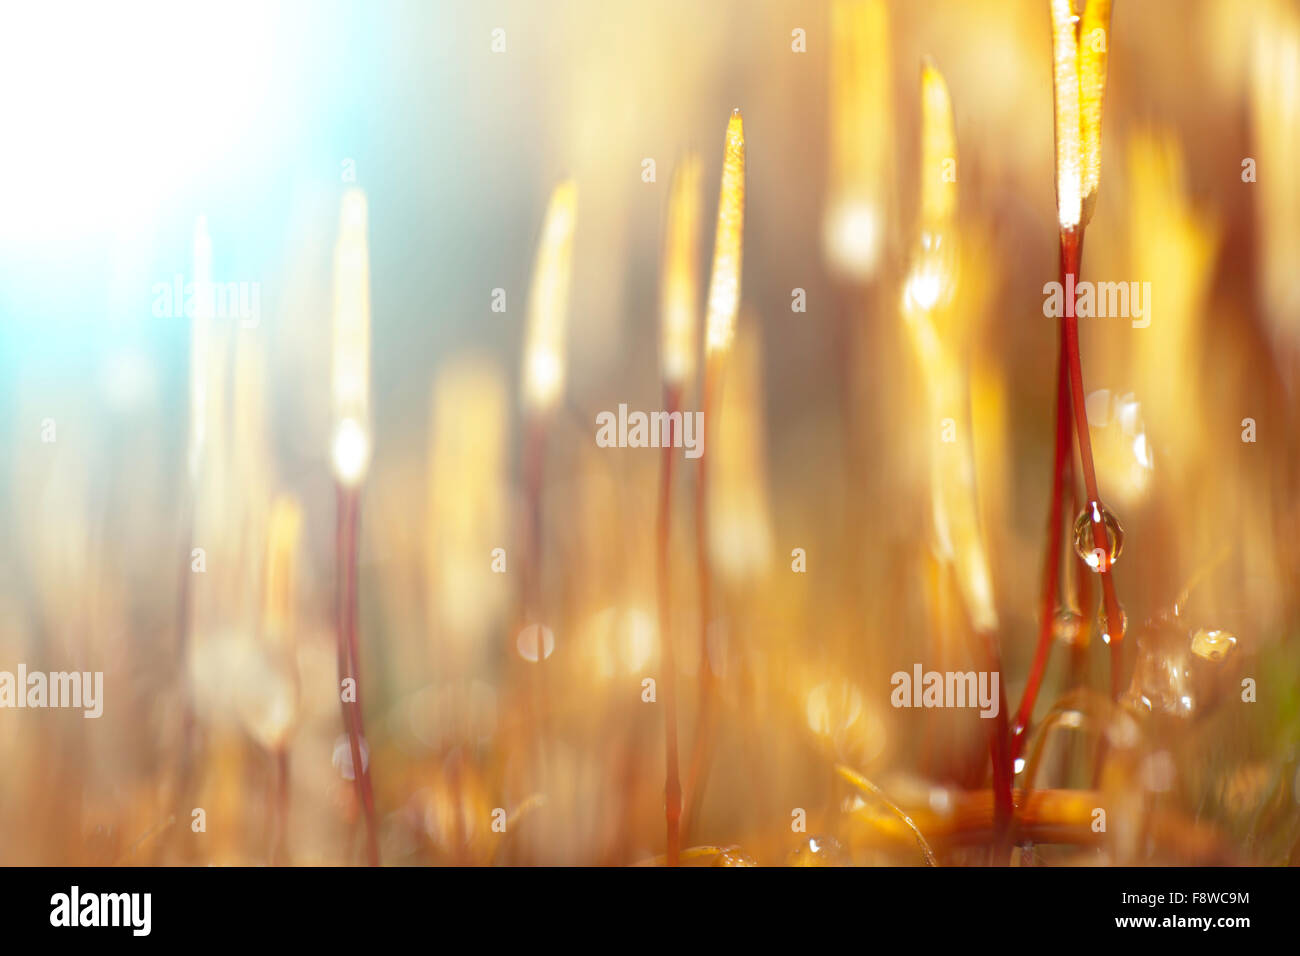 light abstract background blurred image of wet moss closeup Stock Photo